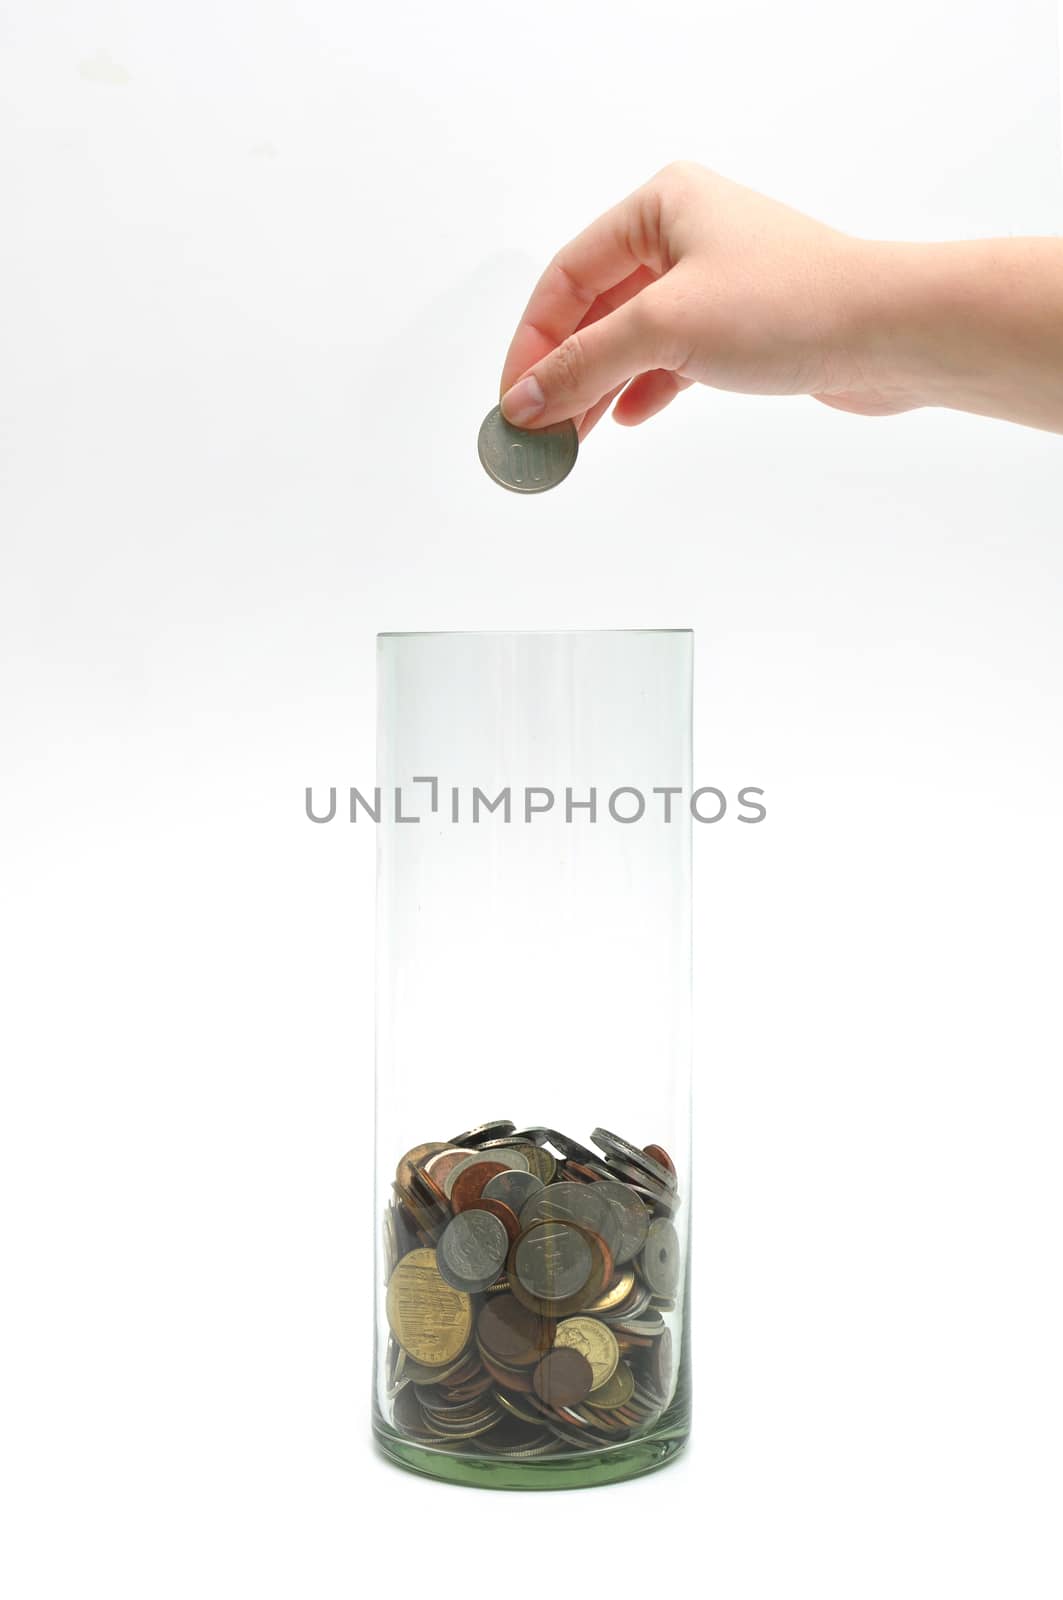 dropping coin into glass jar by tony4urban